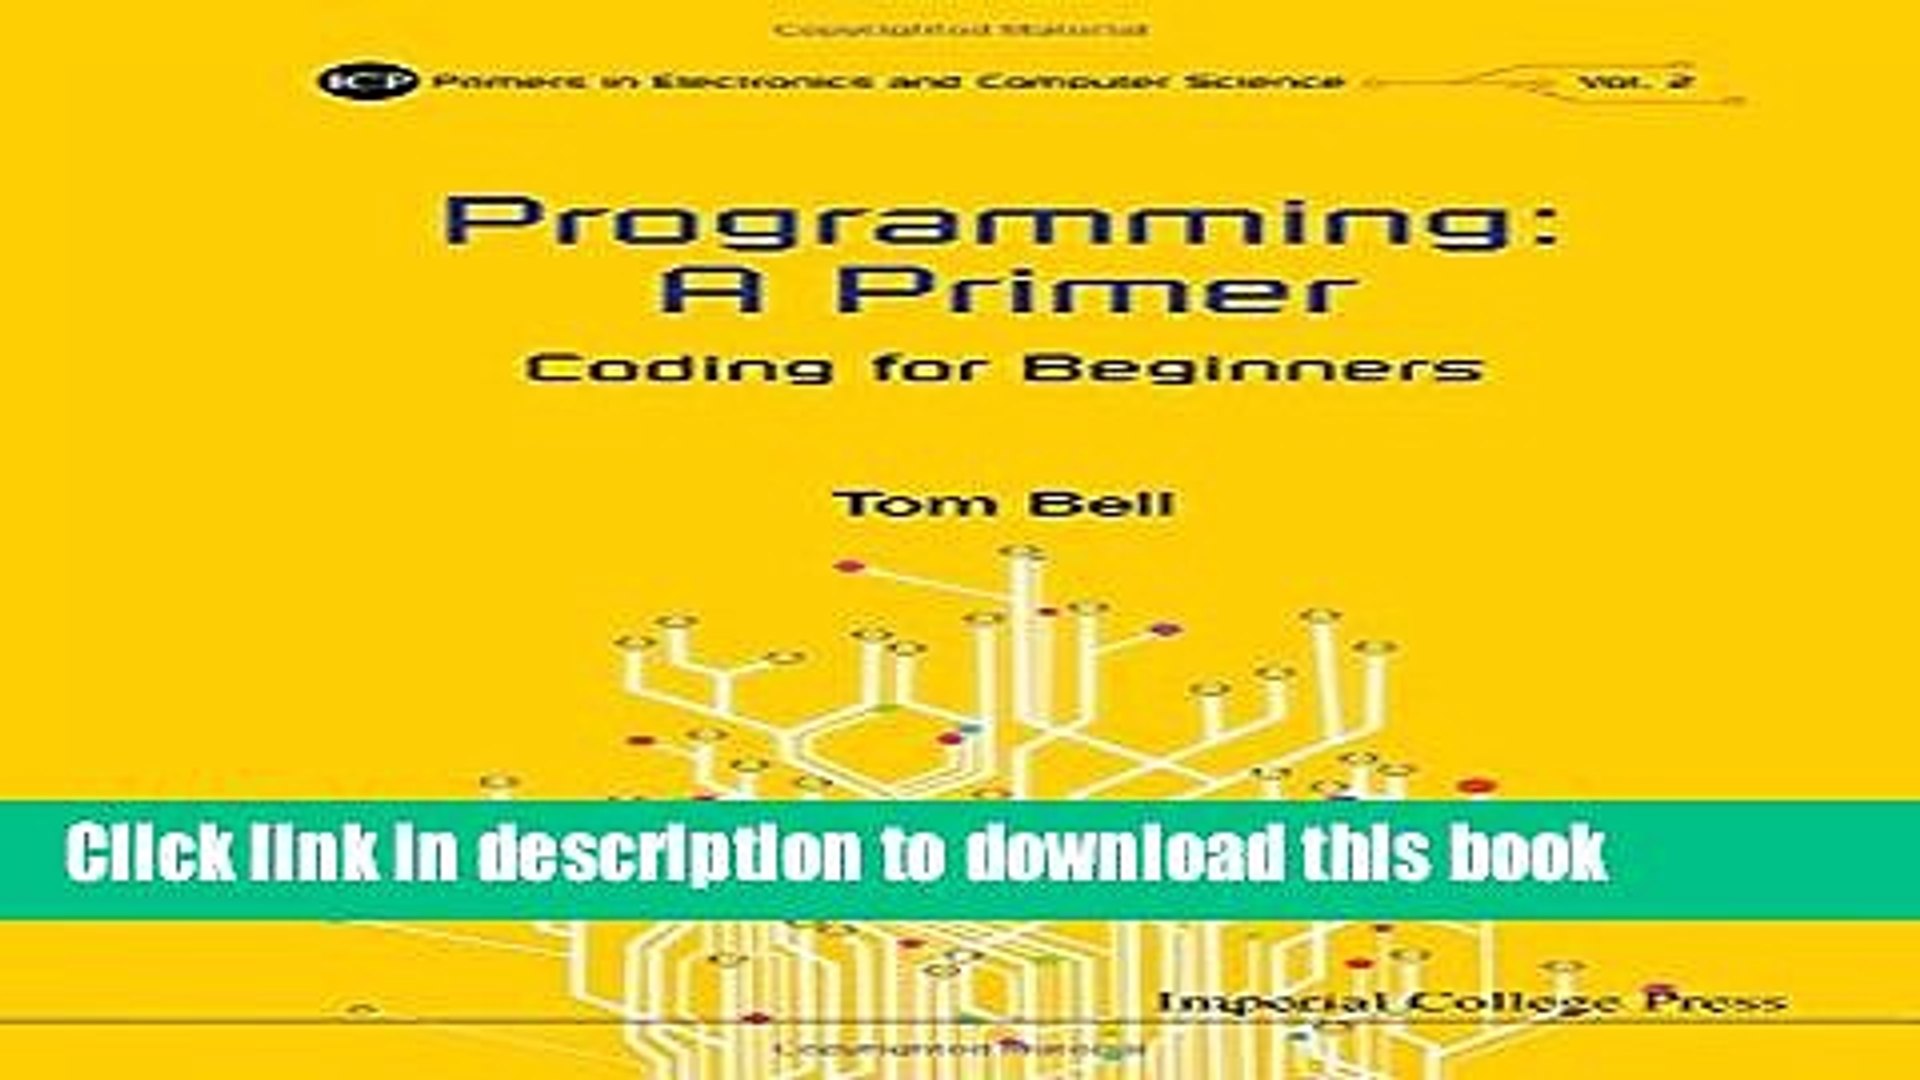 Read Programming: A Primer: Coding for Beginners (Icp Primers in Electronics and Computer